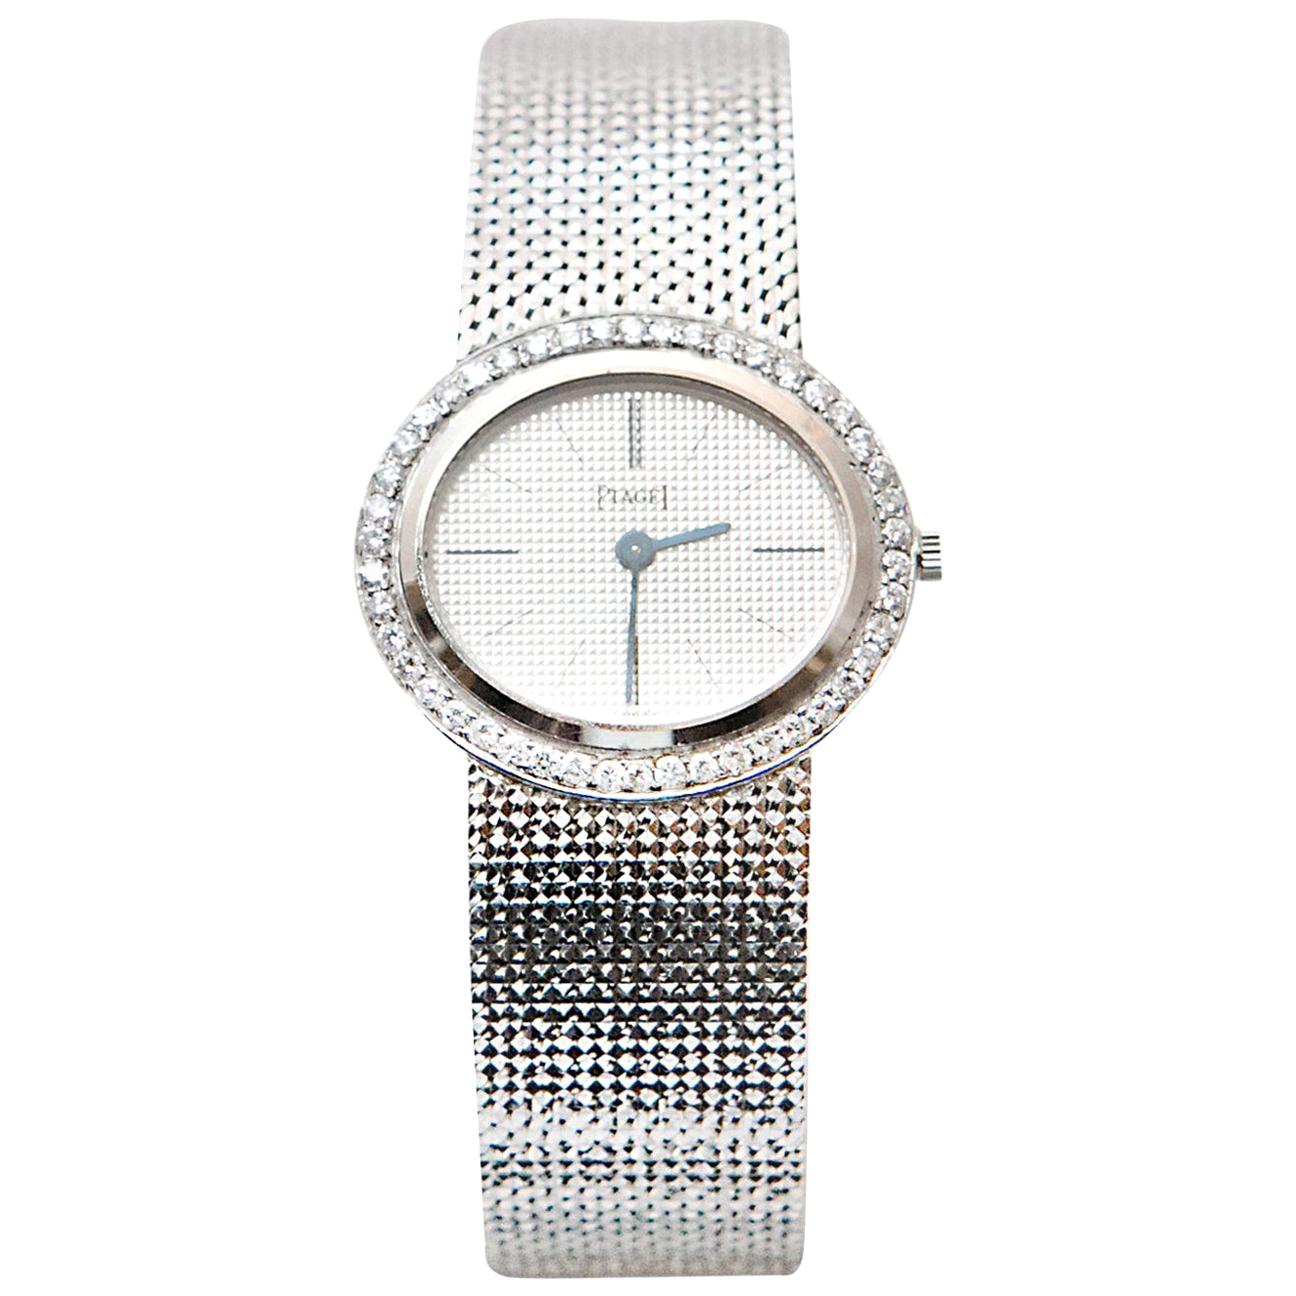 Lady PIAGET watch, 18K white gold 750/1000ème.

Bezel measuring 27mm (1 inch) set with 46 round brilliant cut diamonds.

Mechanical movement, Manual winding.

Extra Thin watch !


18K White Gold gold bracelet.

circa 1965/1970

Total weight : 59